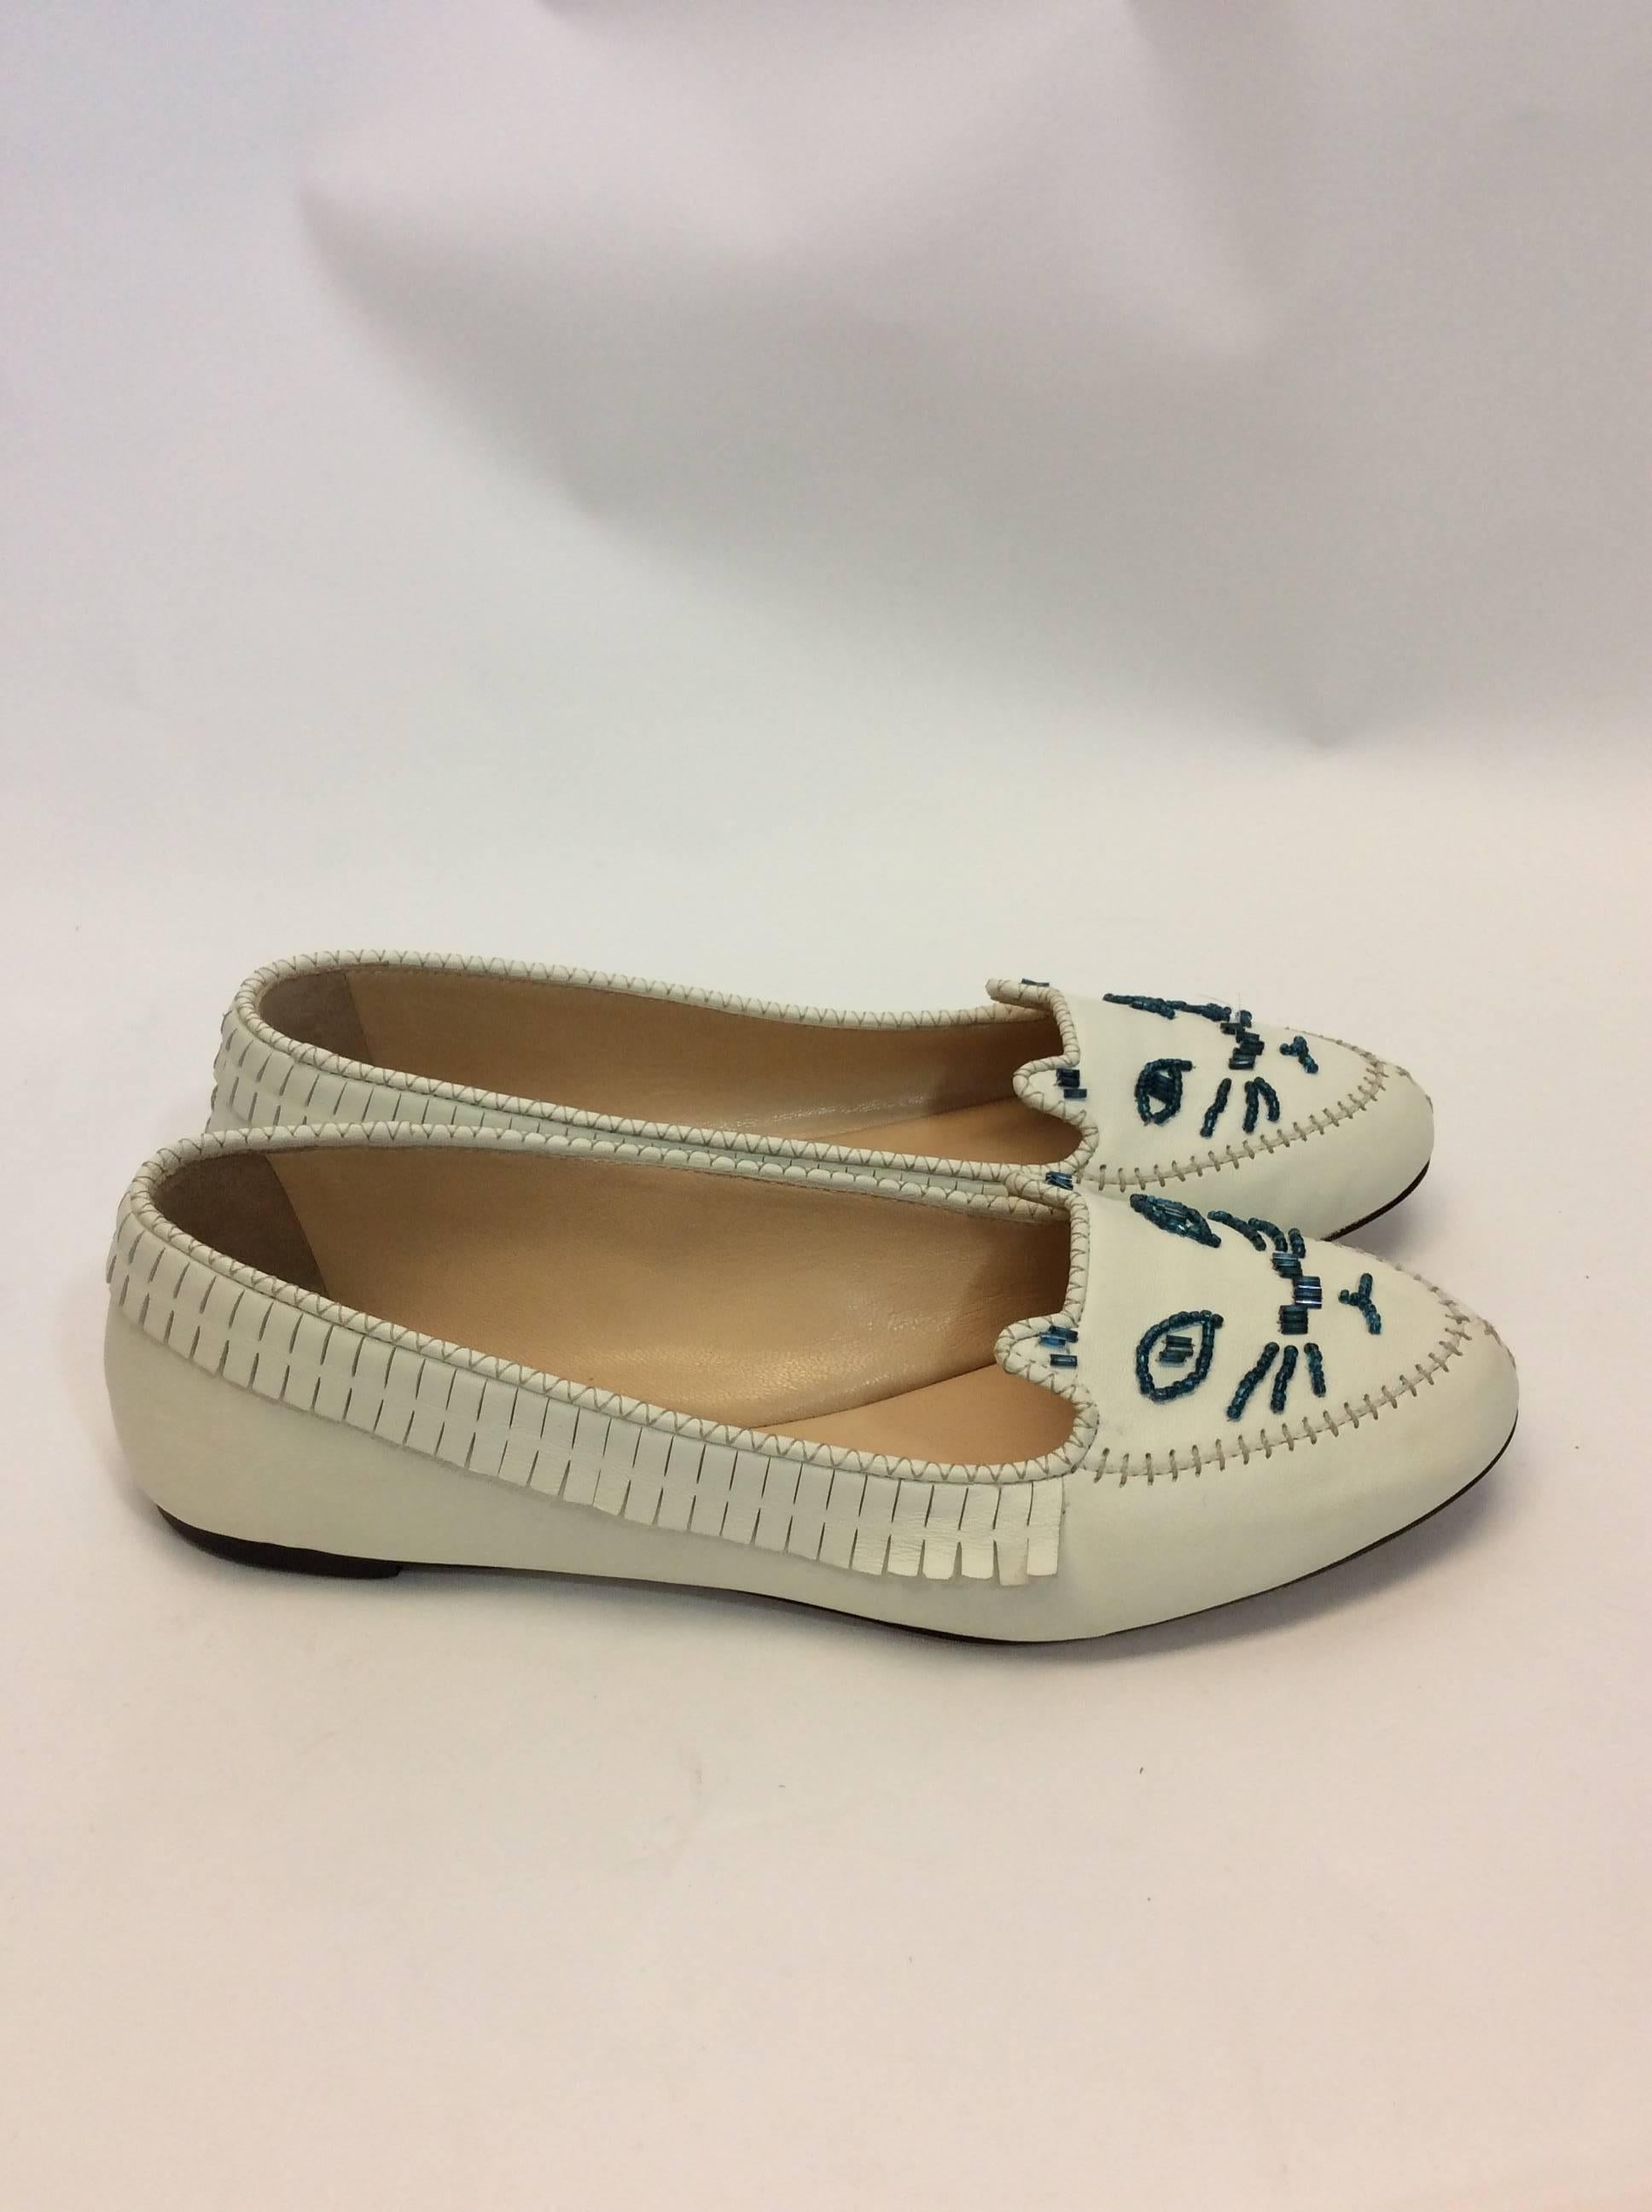 Charlotte Olympia Leather Moccasin Style Flats In Good Condition For Sale In Narberth, PA